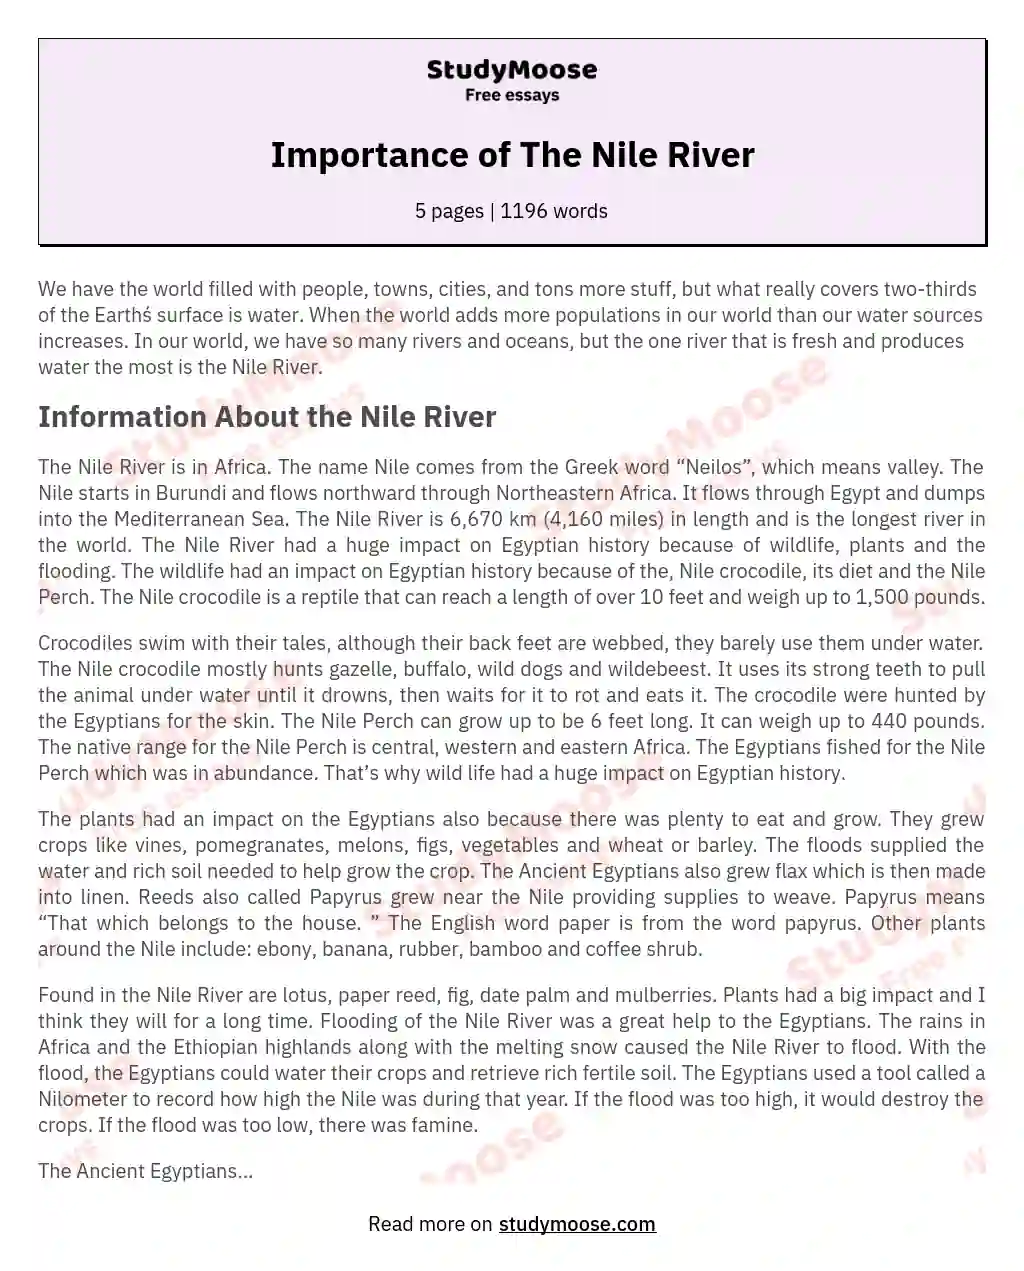 Importance of The Nile River